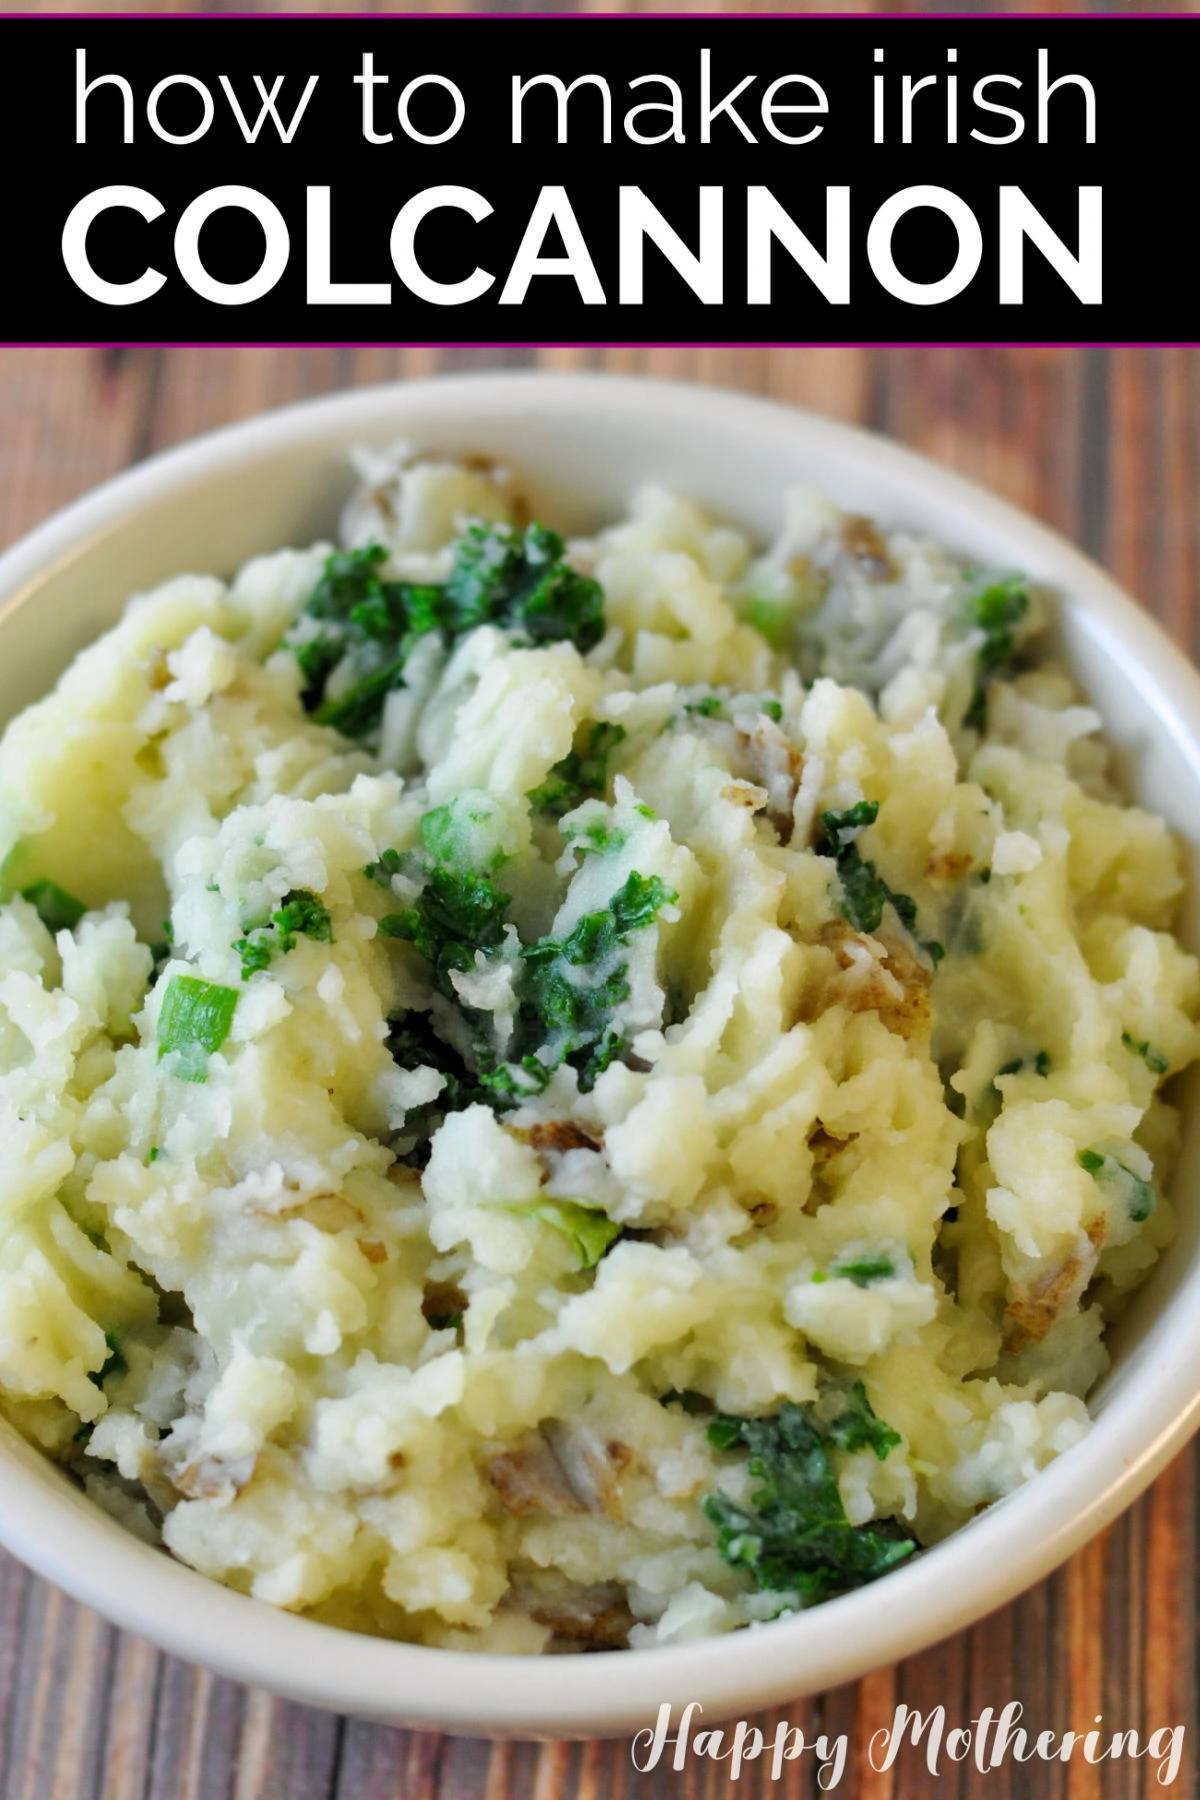 Irish Colcannon in a white bowl on a brown wood table